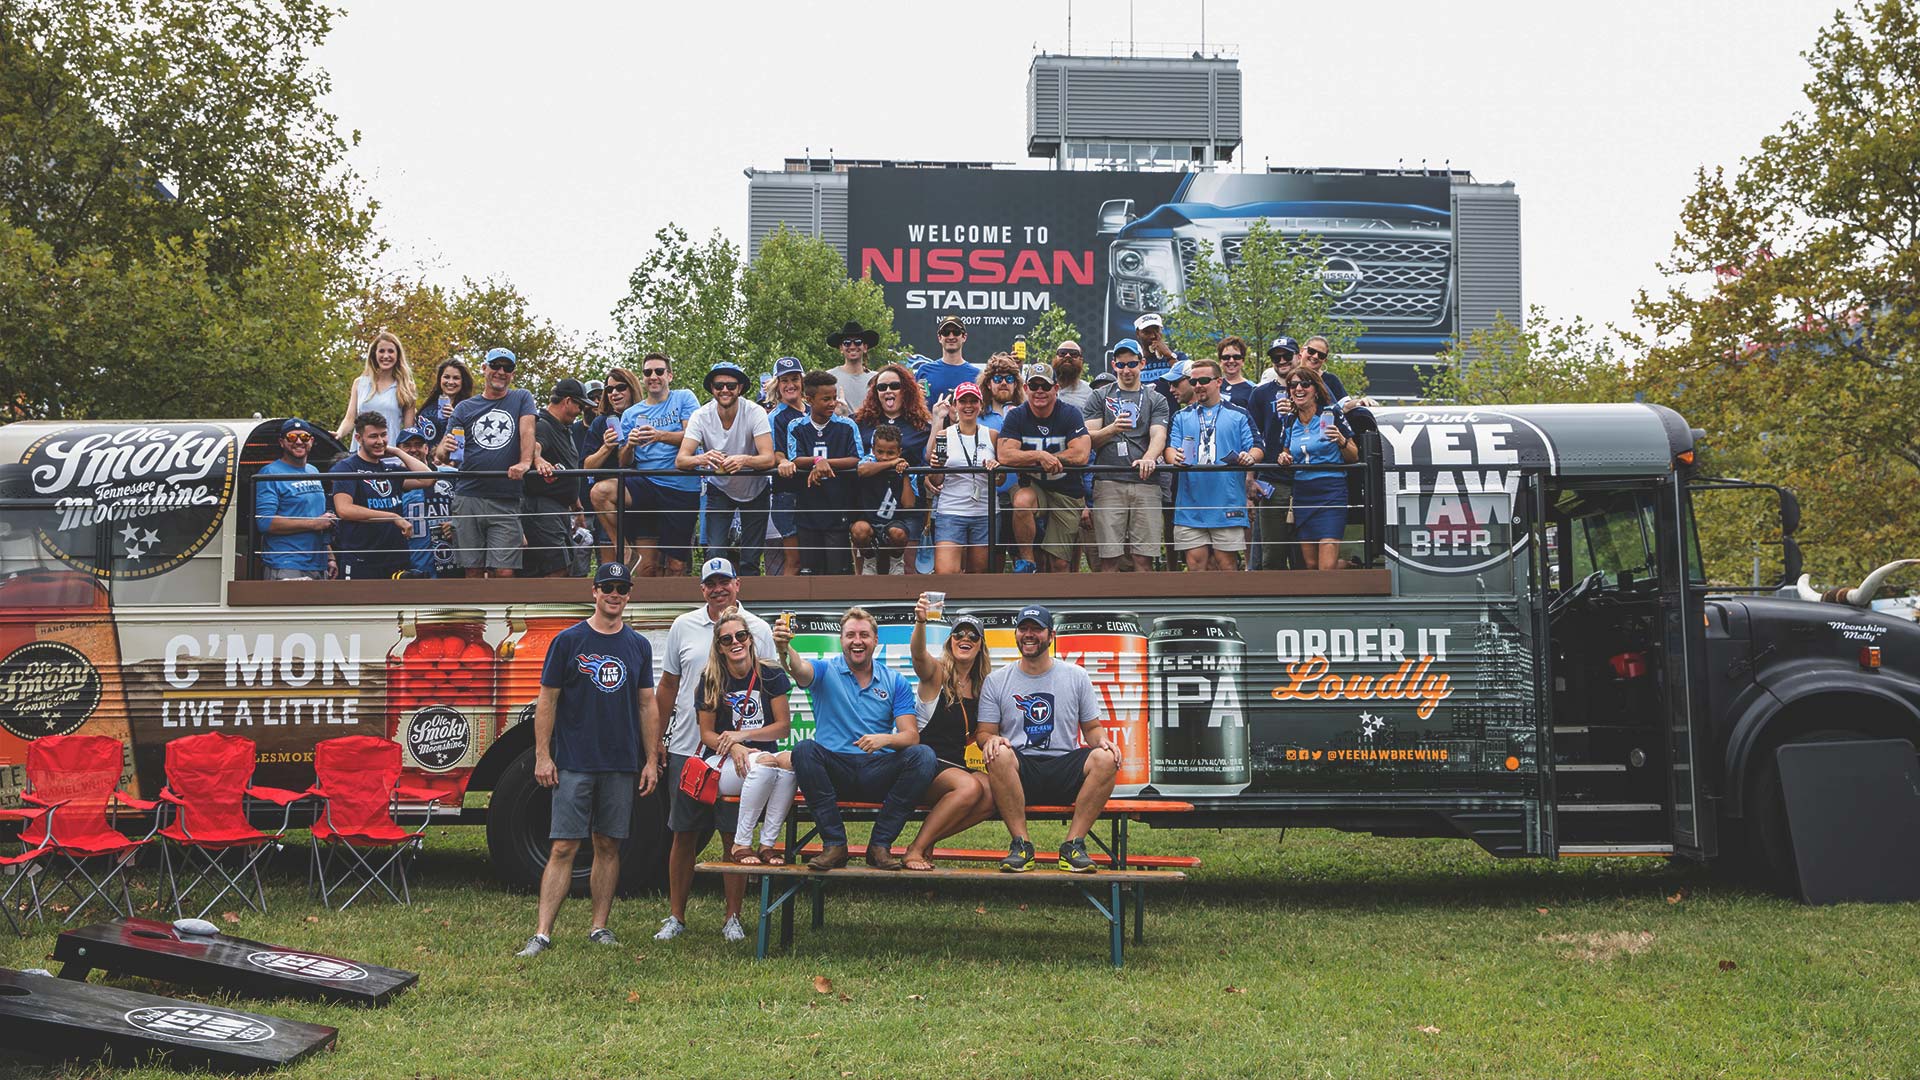 tailgate party images